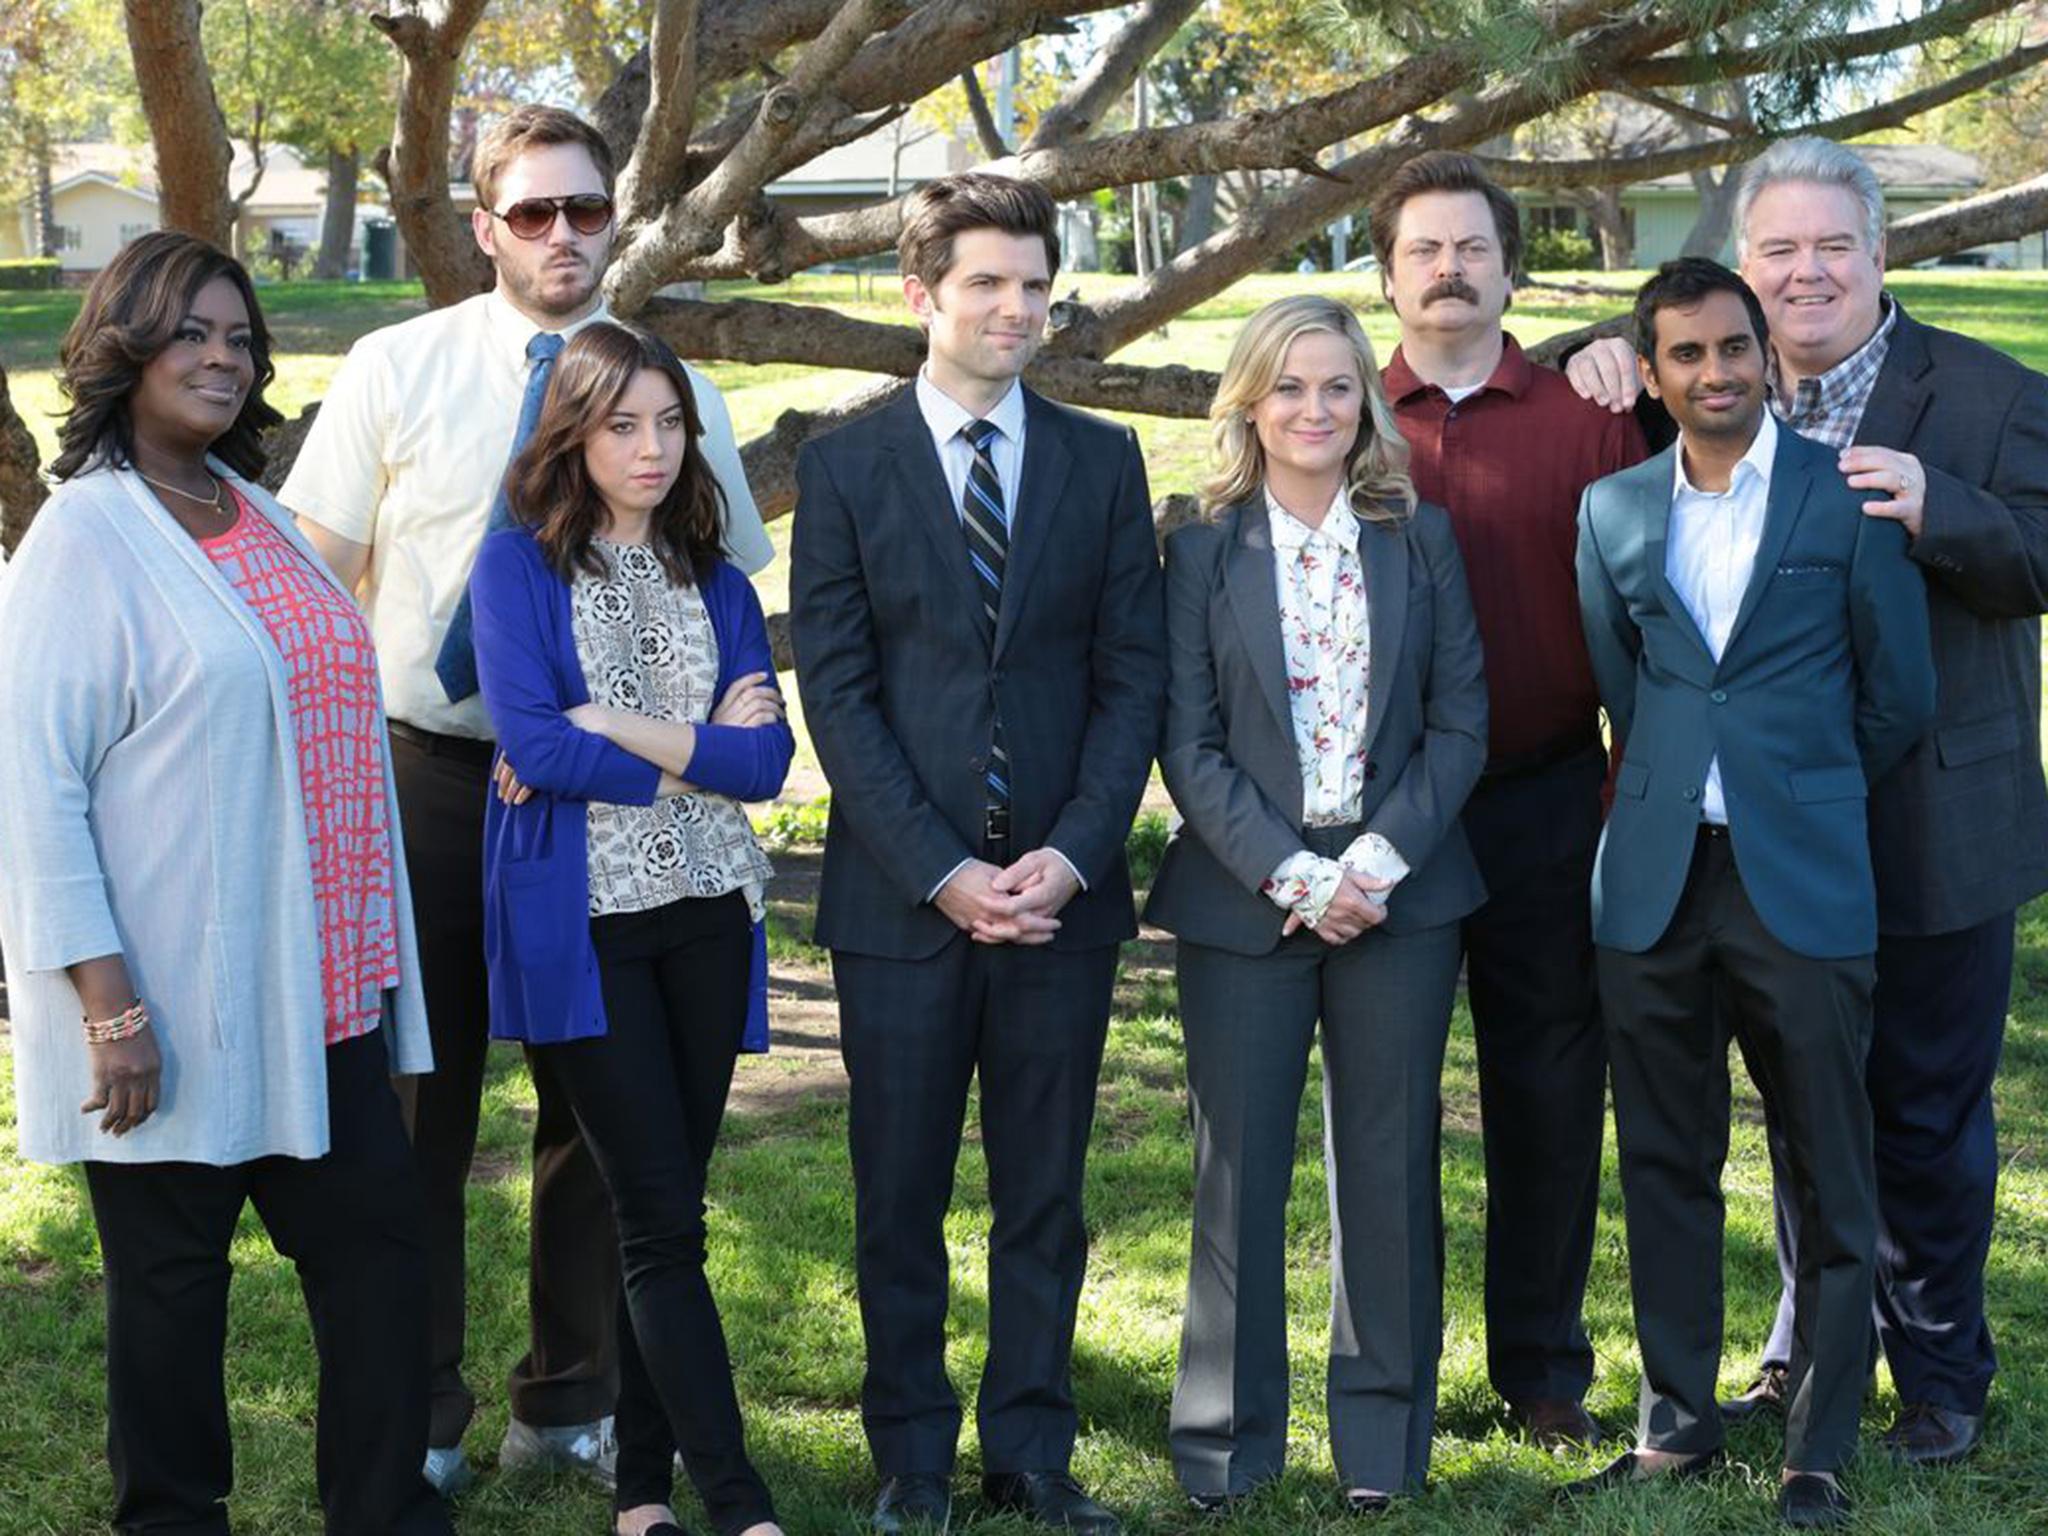 The cast of ‘Parks and Recreation’